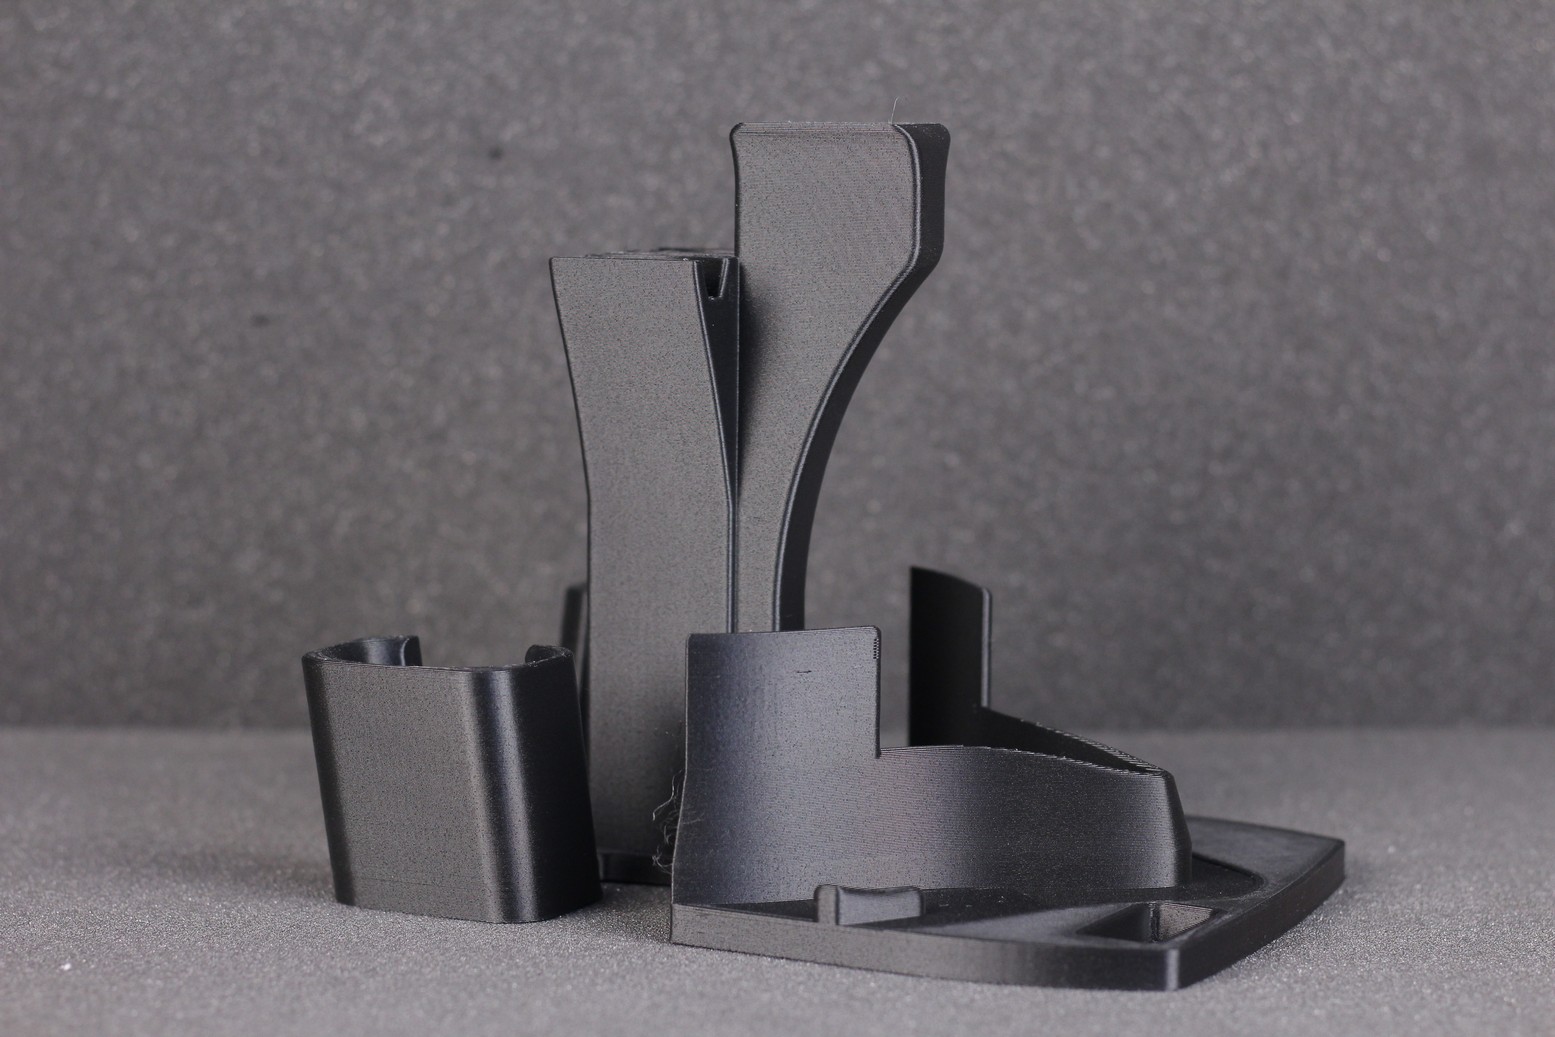 OCULUS QUEST 2 STAND printed on V Core 3 3 | 3D Printing Filament Review: Which one is best?